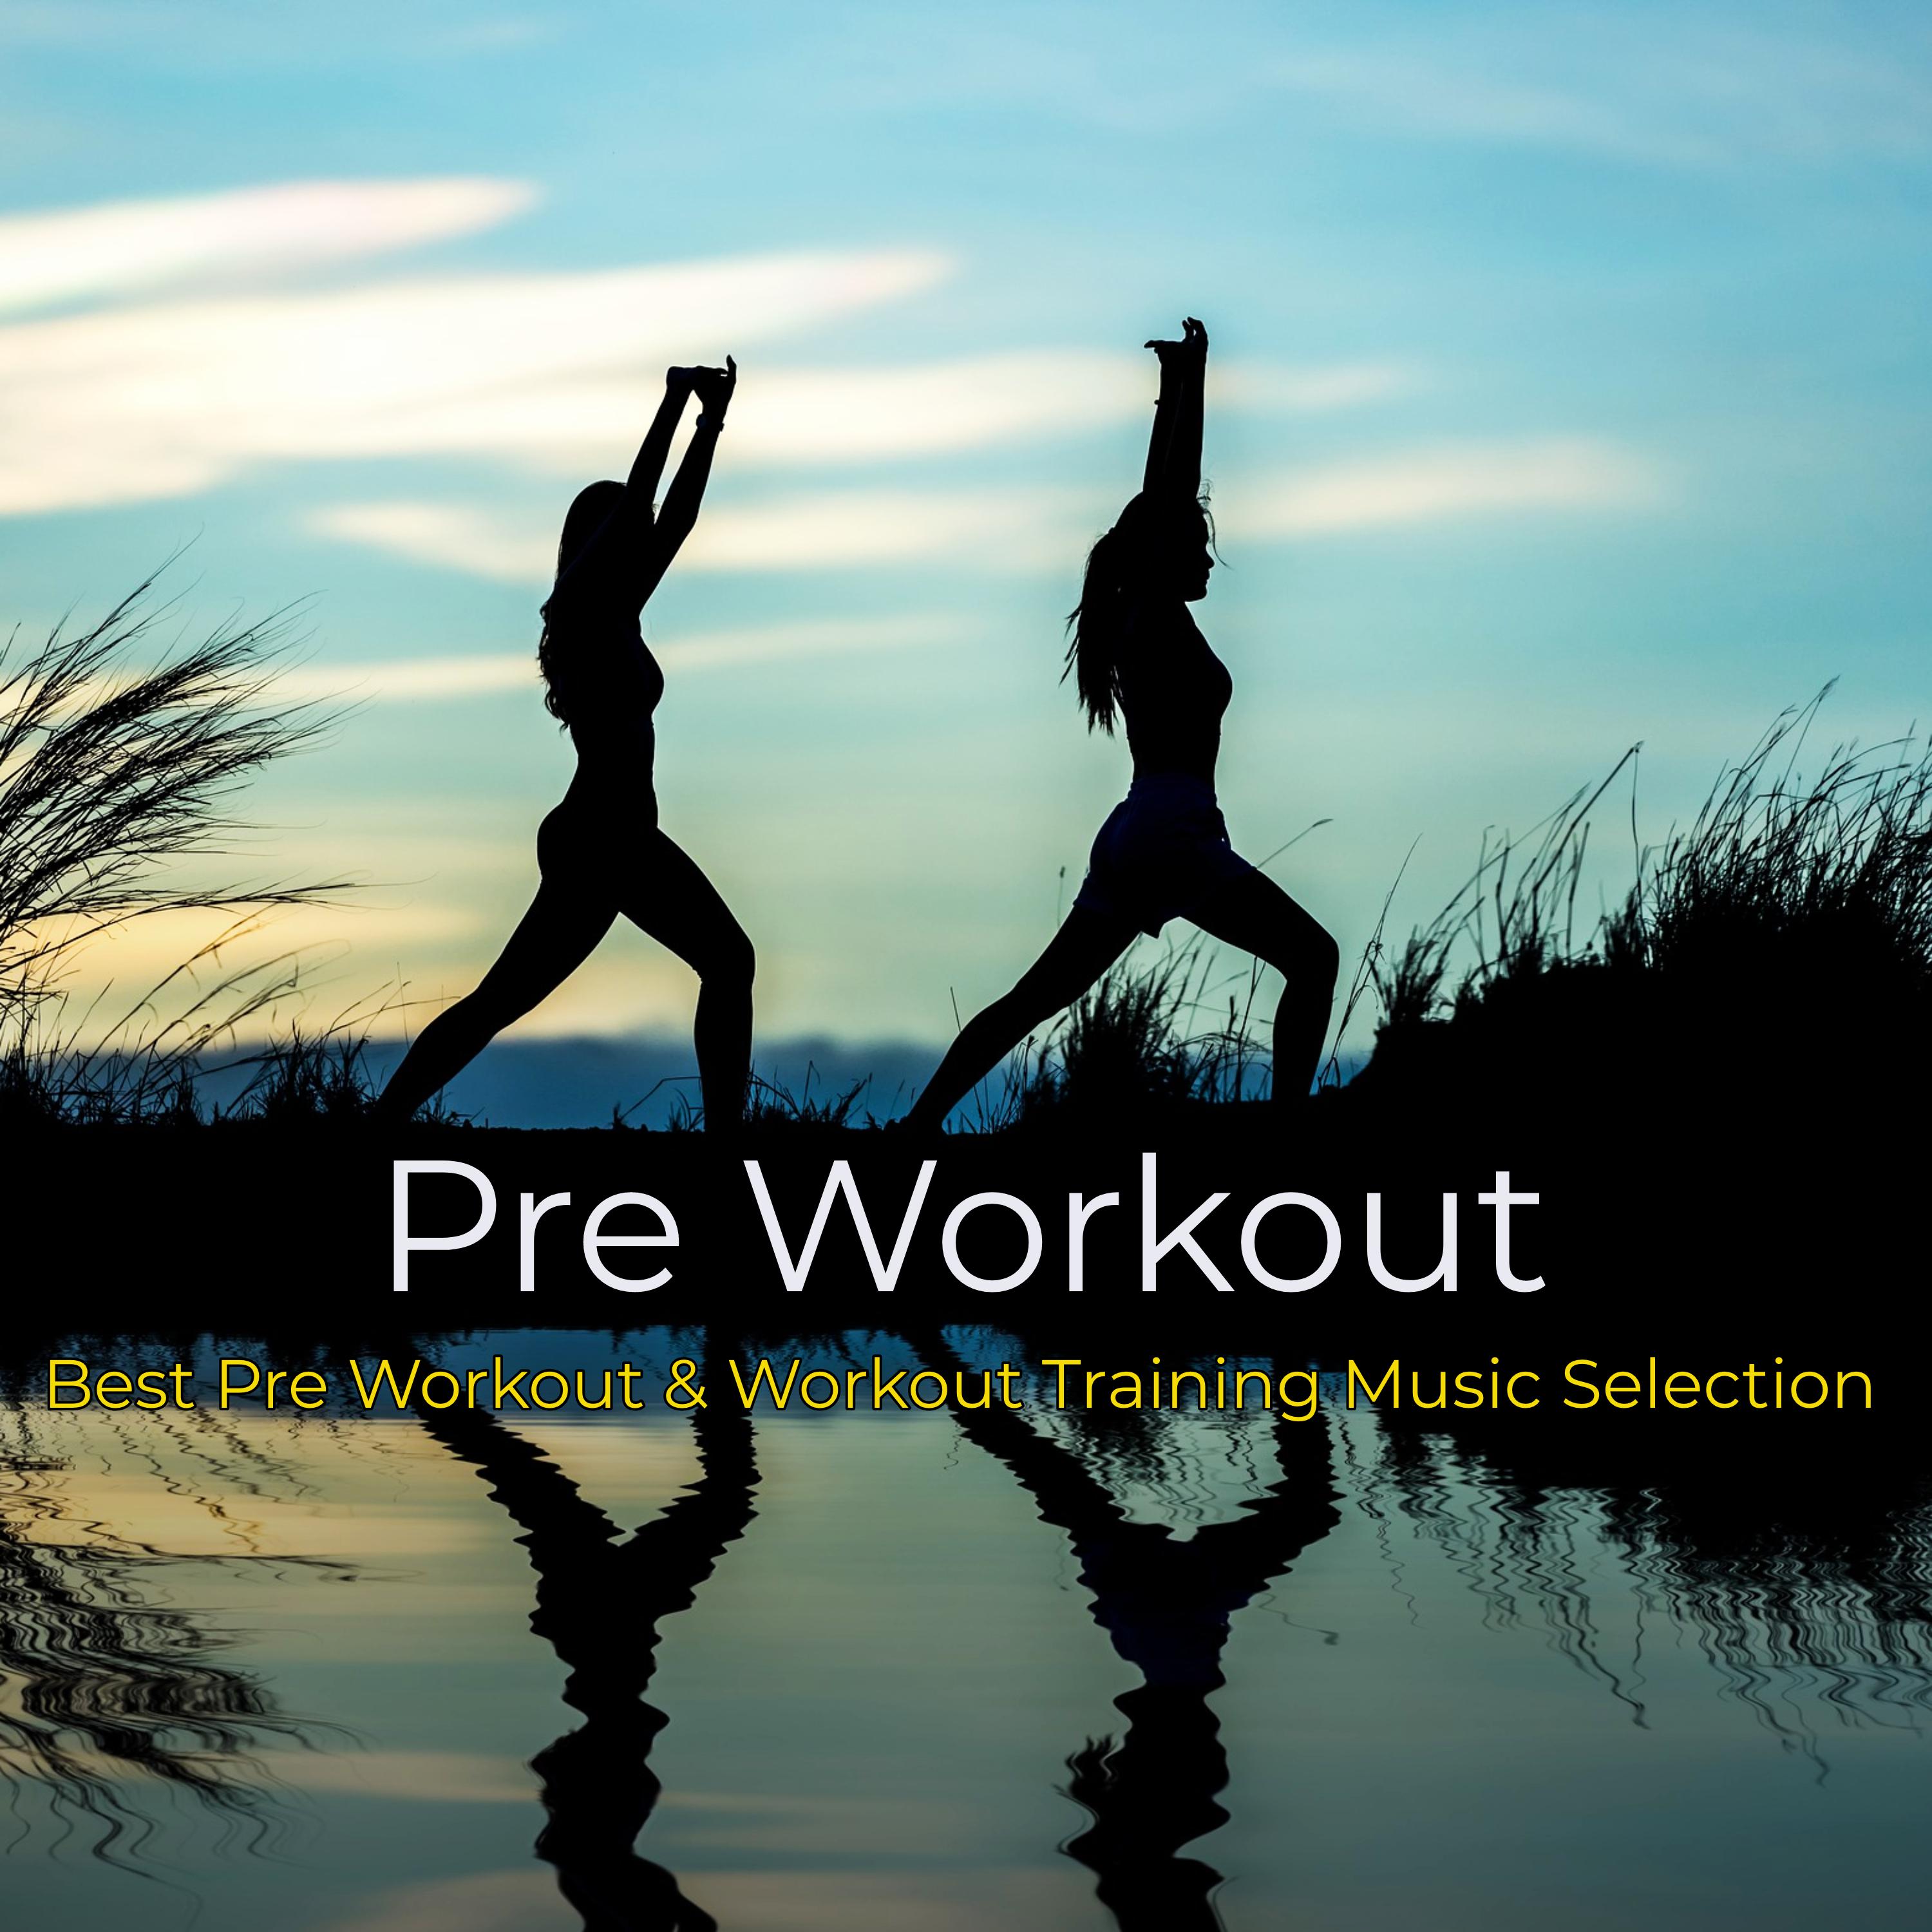 Prepare Your Body - Best Workout